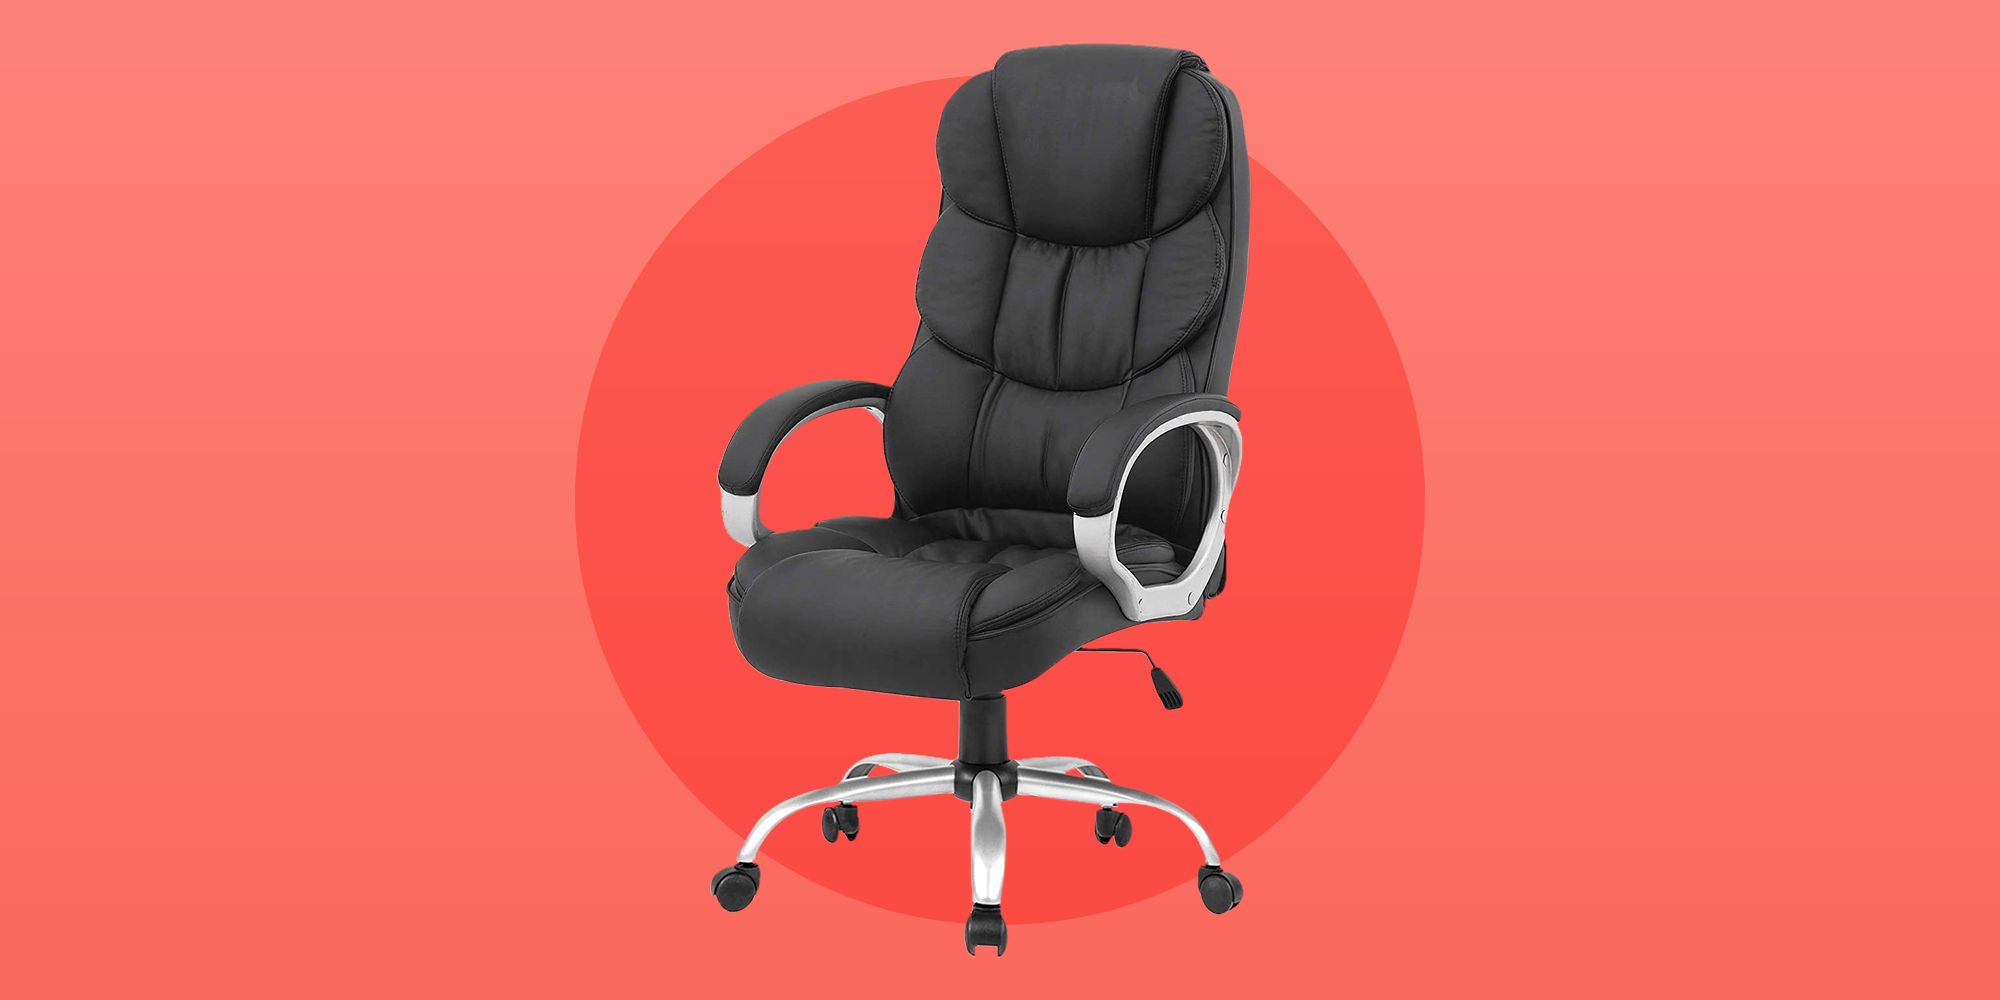 The 7 Best Office Chairs of 2022 - Comfortable Chairs for Your Home Office